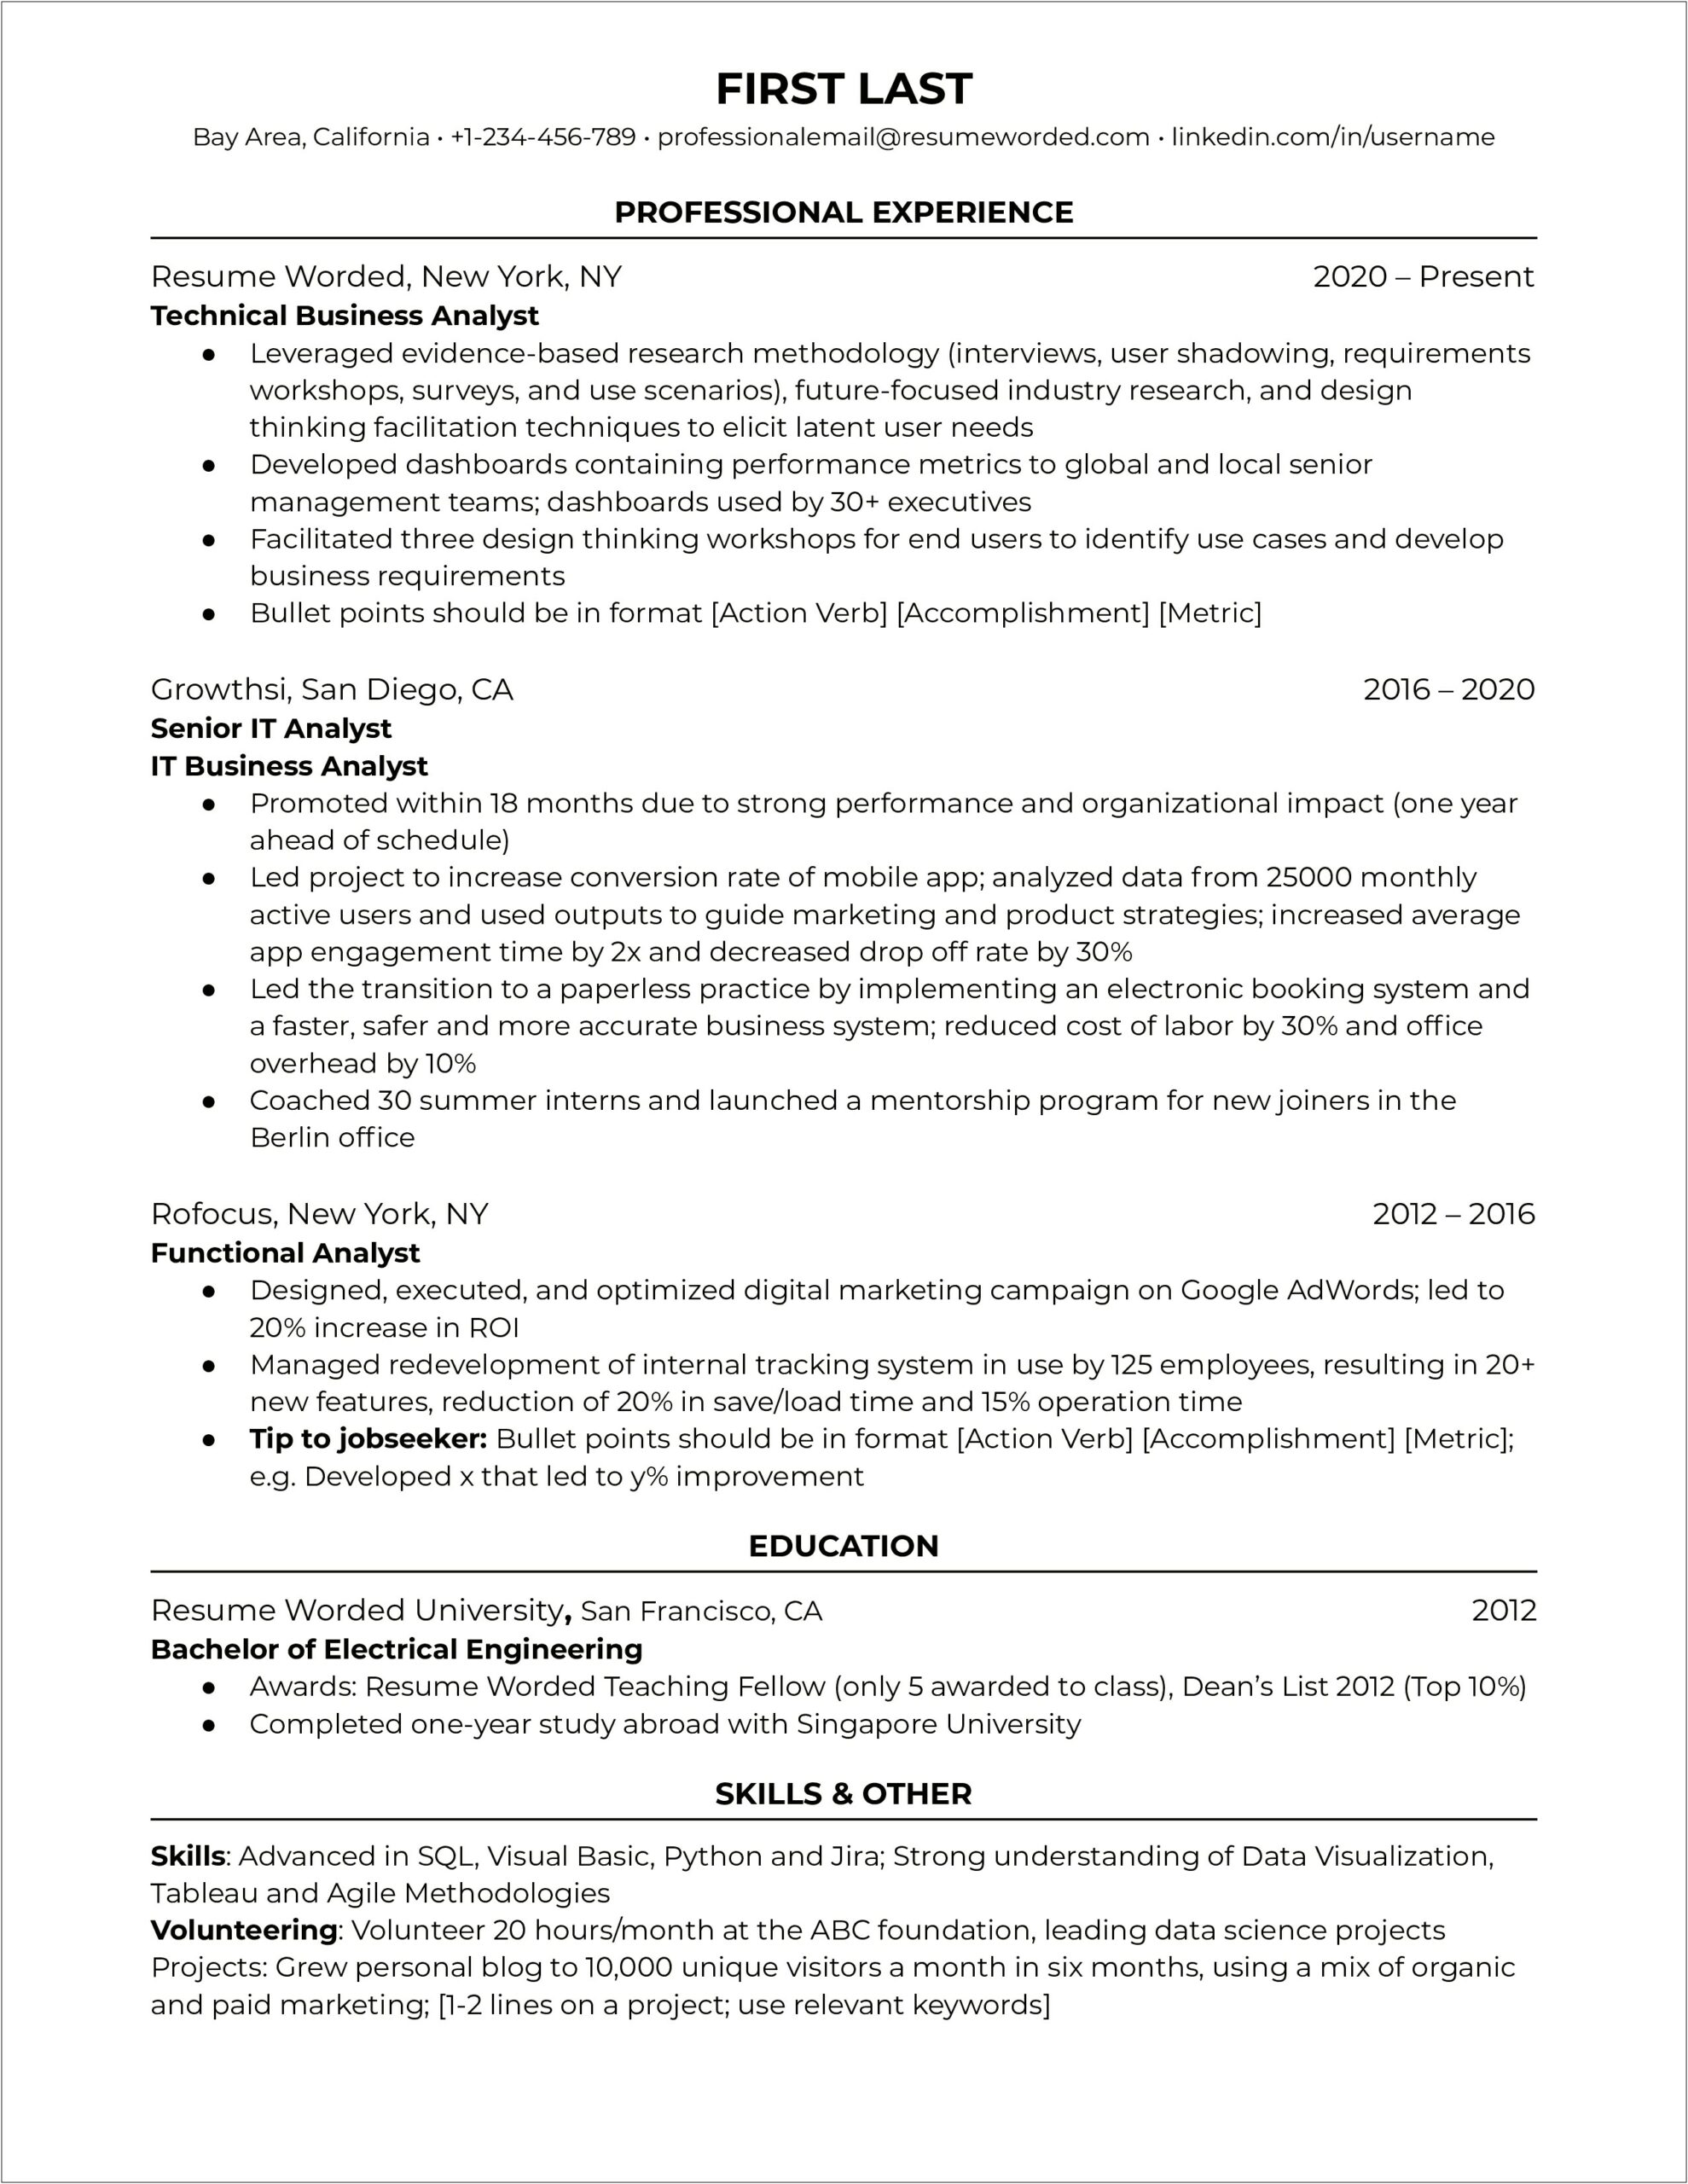 One Year Experience Resume For Business Analyst